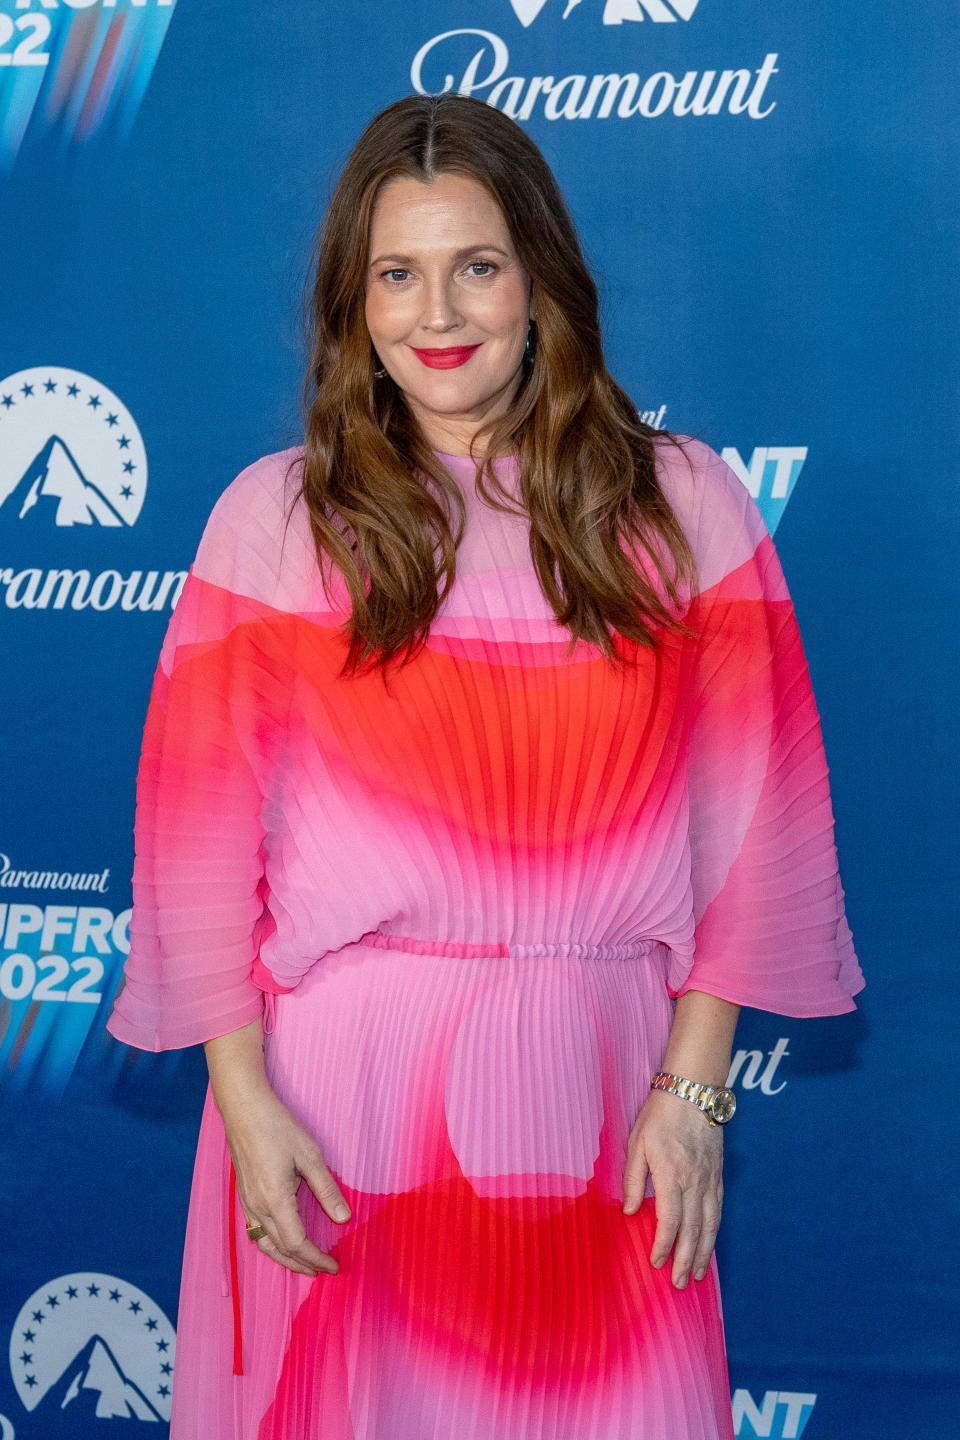 NEW YORK, NEW YORK - MAY 18: Drew Barrymore attends the 2022 Paramount Upfront at 666 Madison Avenue on May 18, 2022 in New York City. (Photo by Roy Rochlin/FilmMagic)